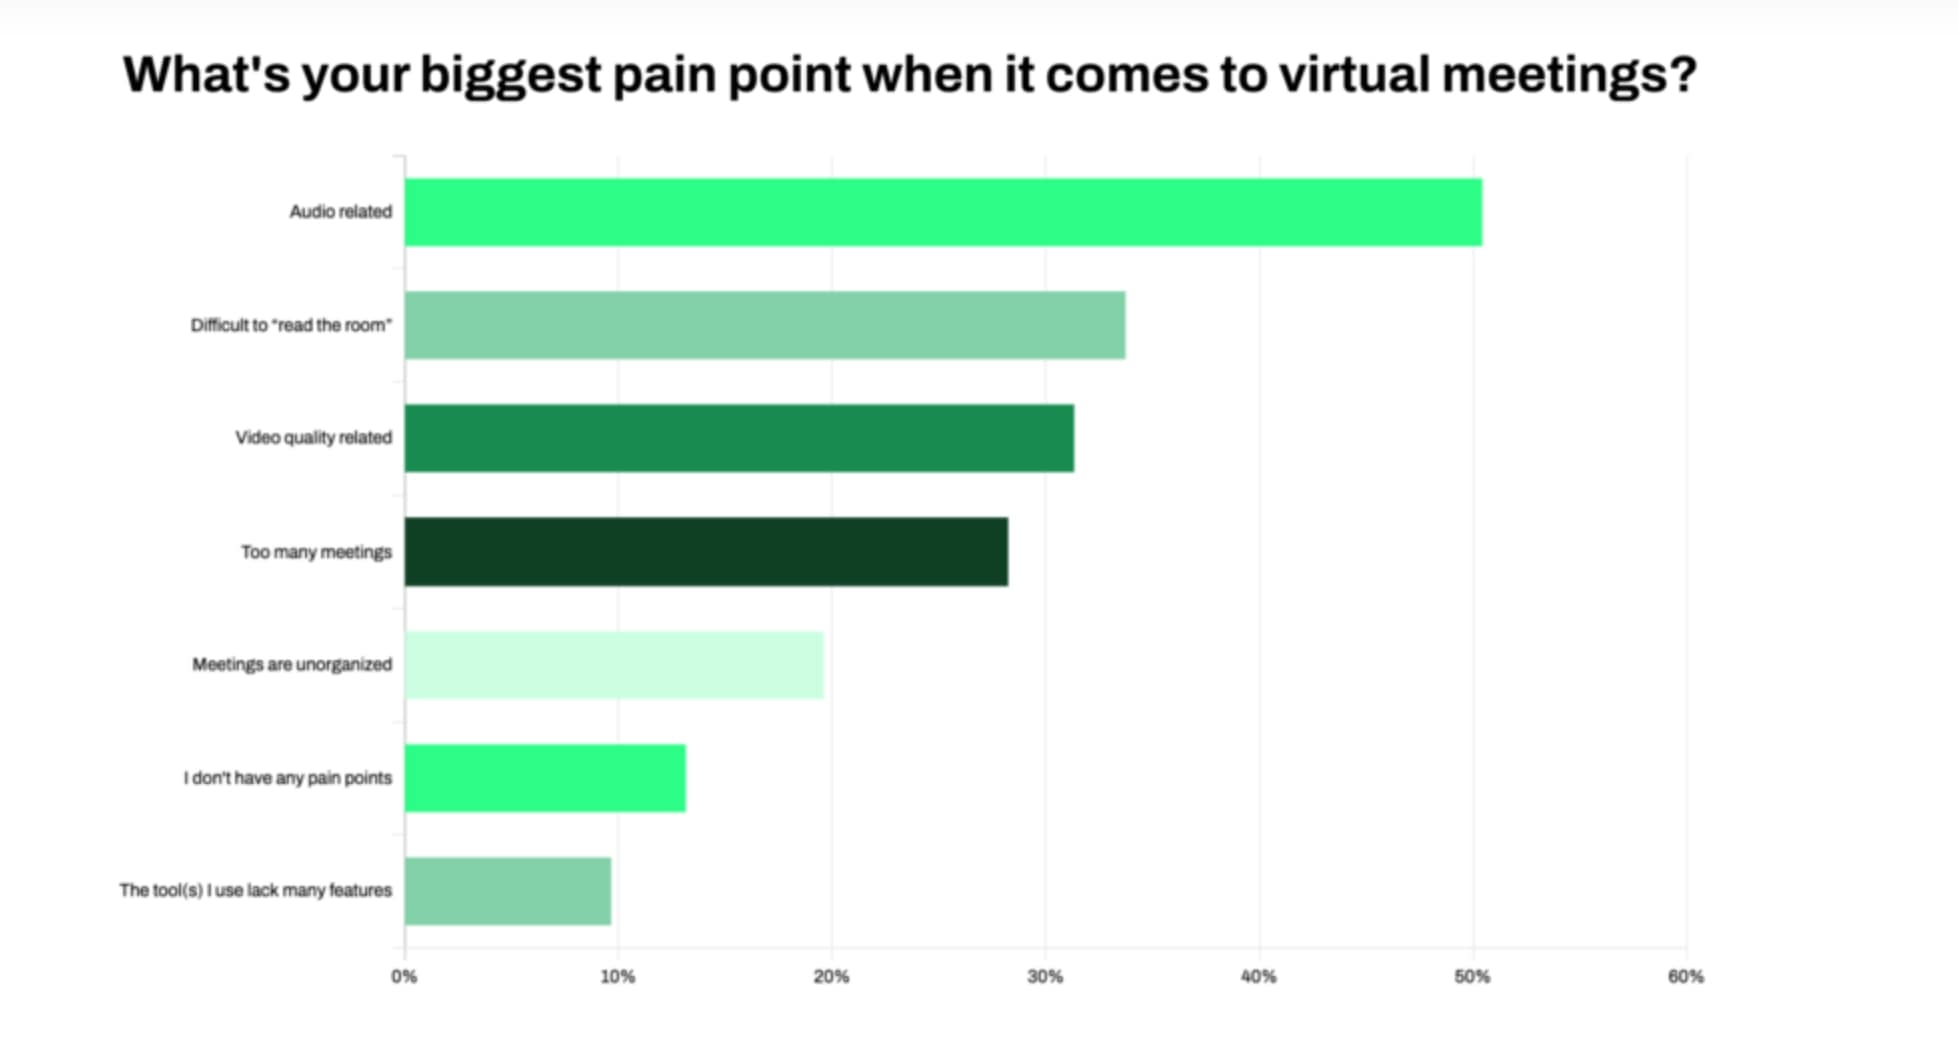 What's Your Biggest Pain Point When It Comes To Virtual Meetings